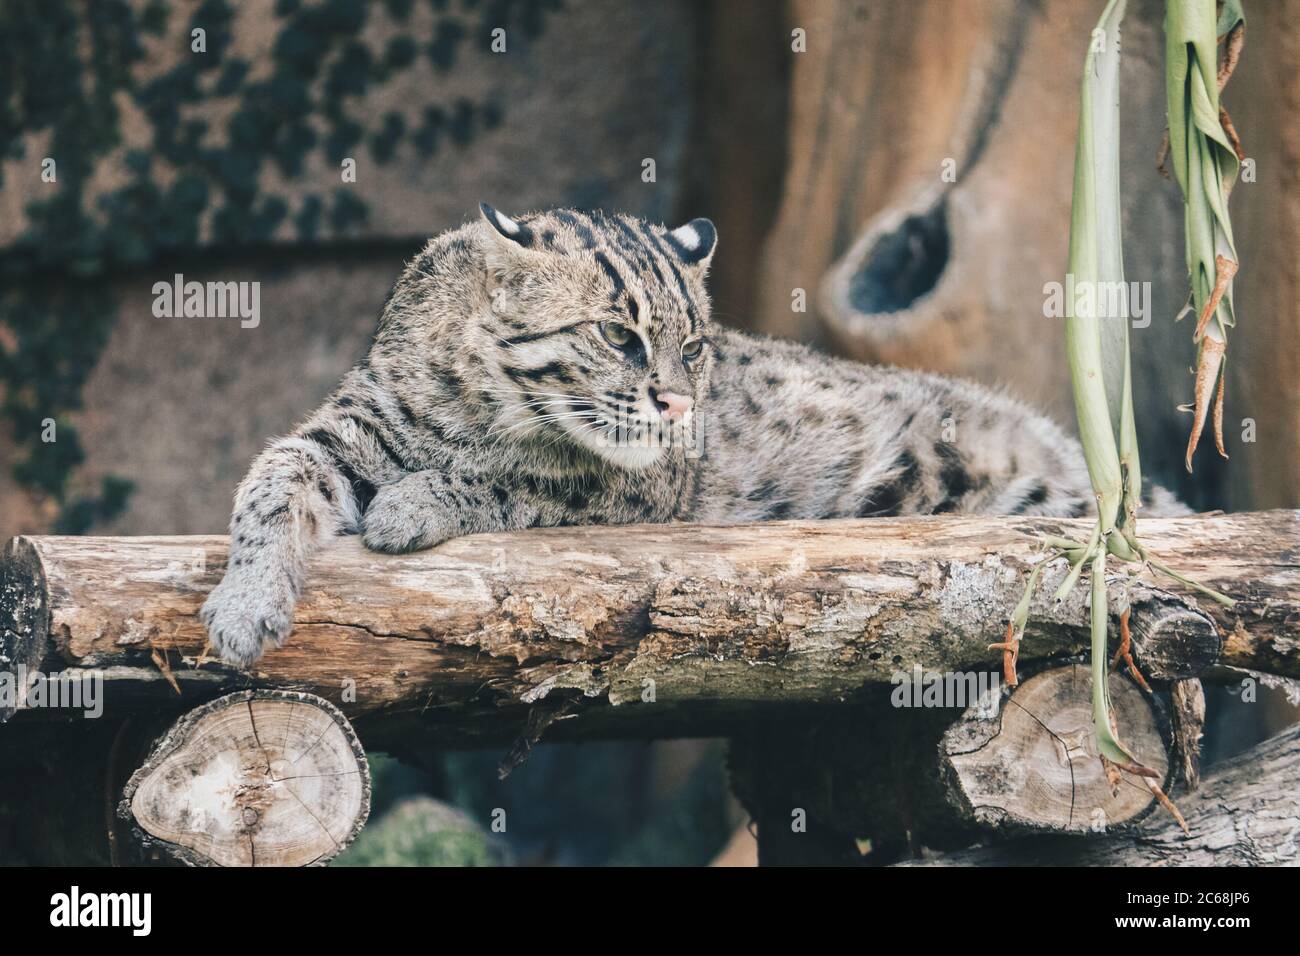 Fishing cat or Mangrove cat (Prionailurus viverrinus) rests on a perch Stock Photo